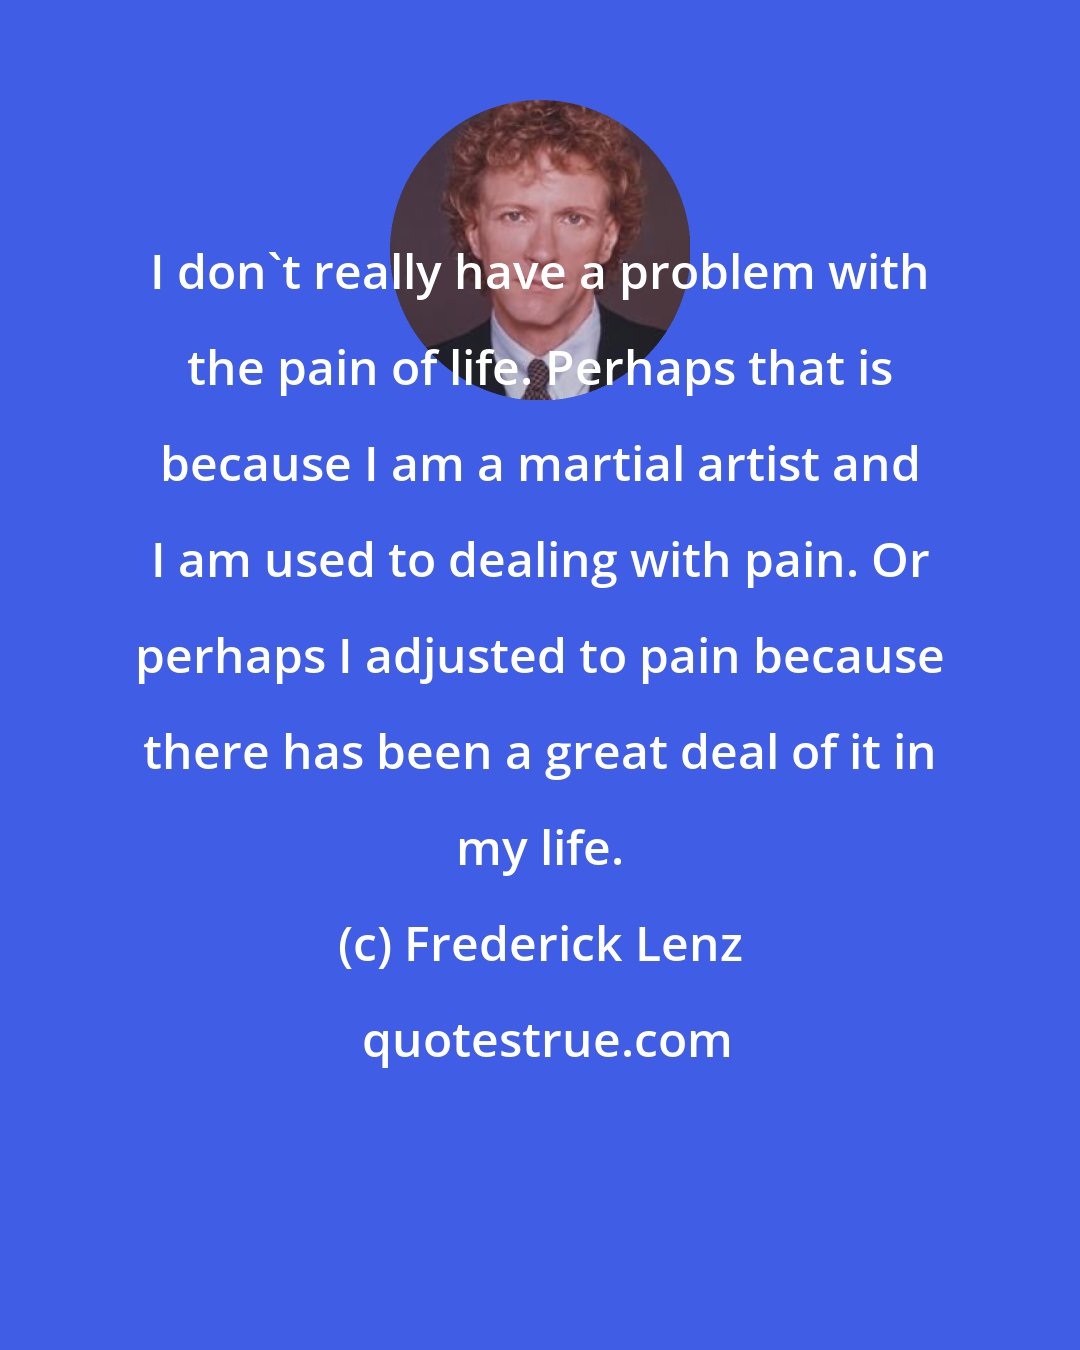 Frederick Lenz: I don't really have a problem with the pain of life. Perhaps that is because I am a martial artist and I am used to dealing with pain. Or perhaps I adjusted to pain because there has been a great deal of it in my life.